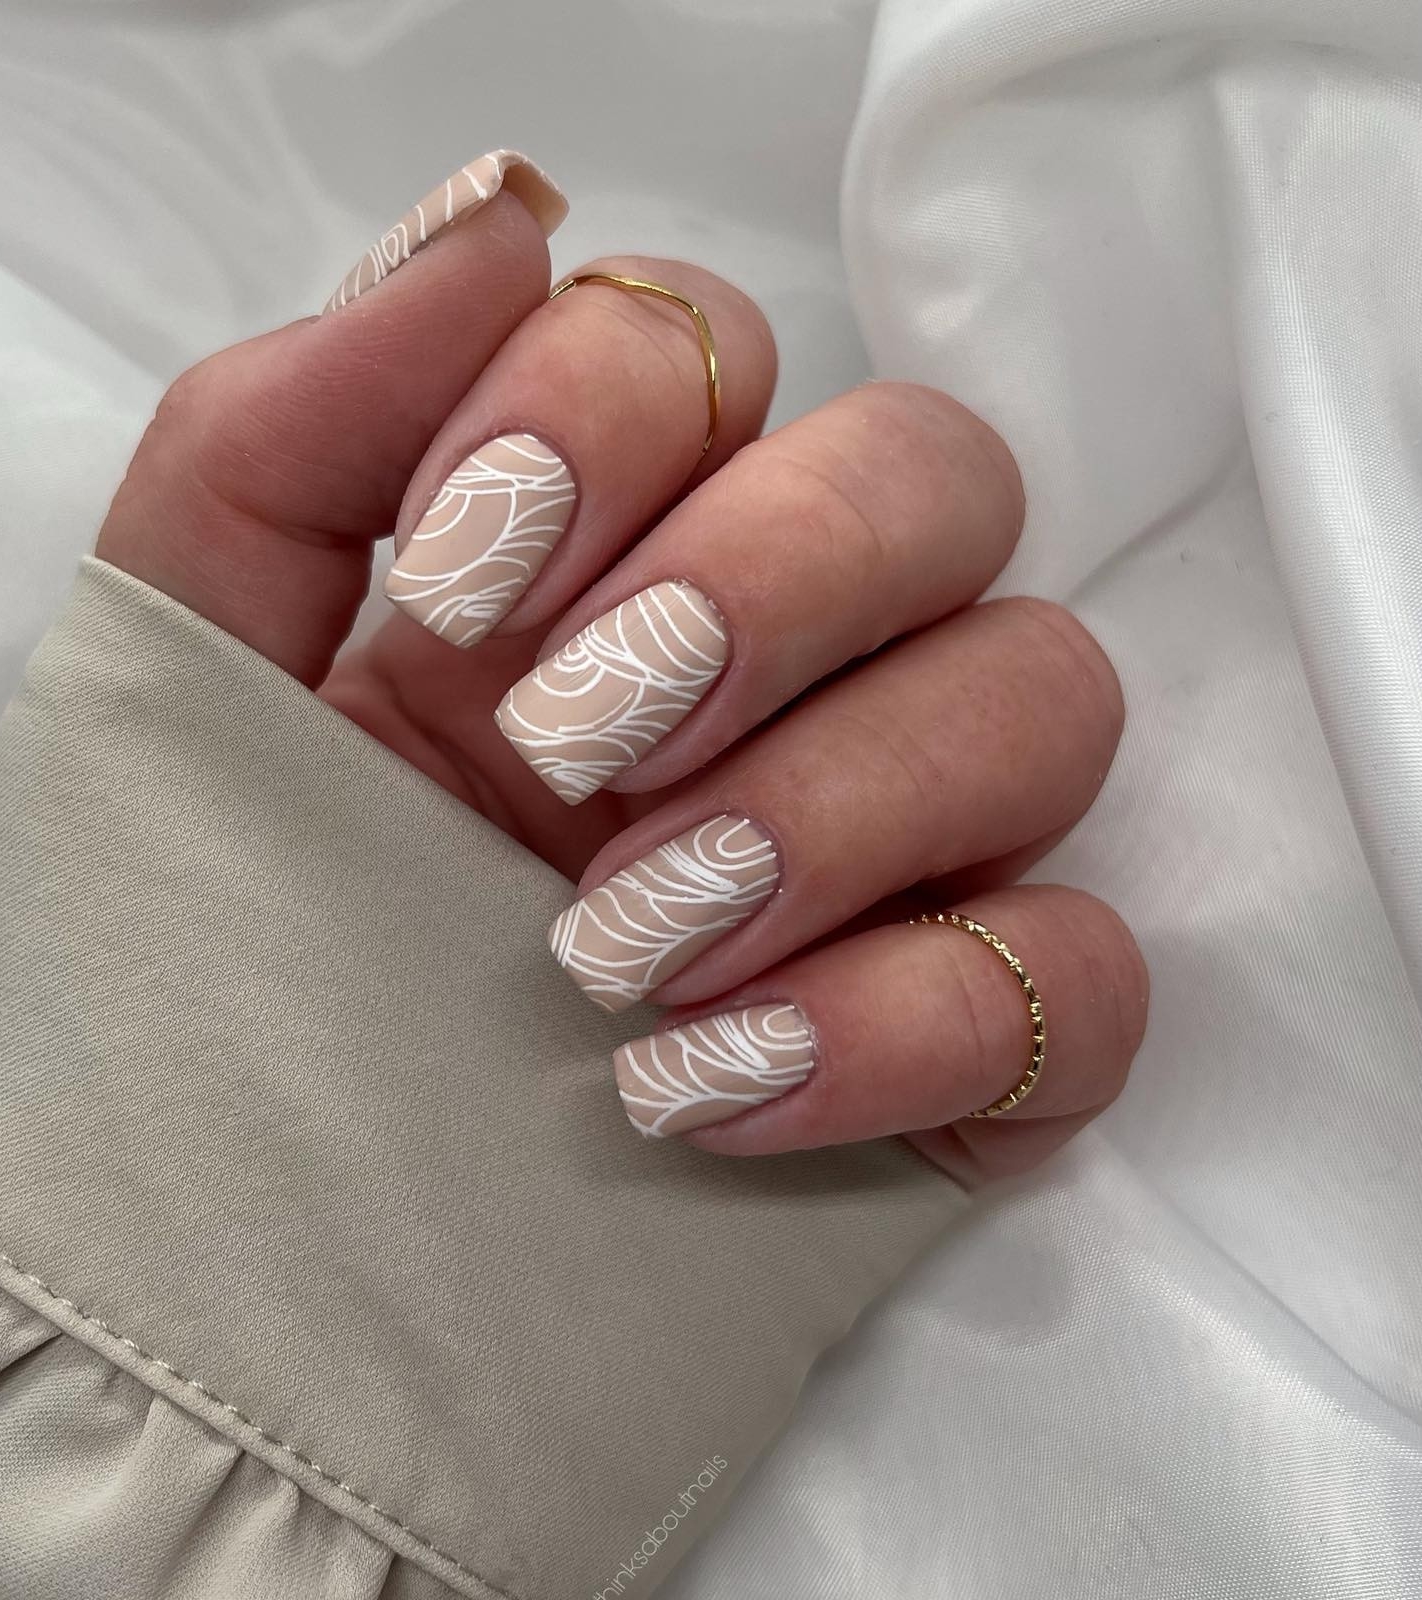 Short Square Beige Nails with Abstract White Lines